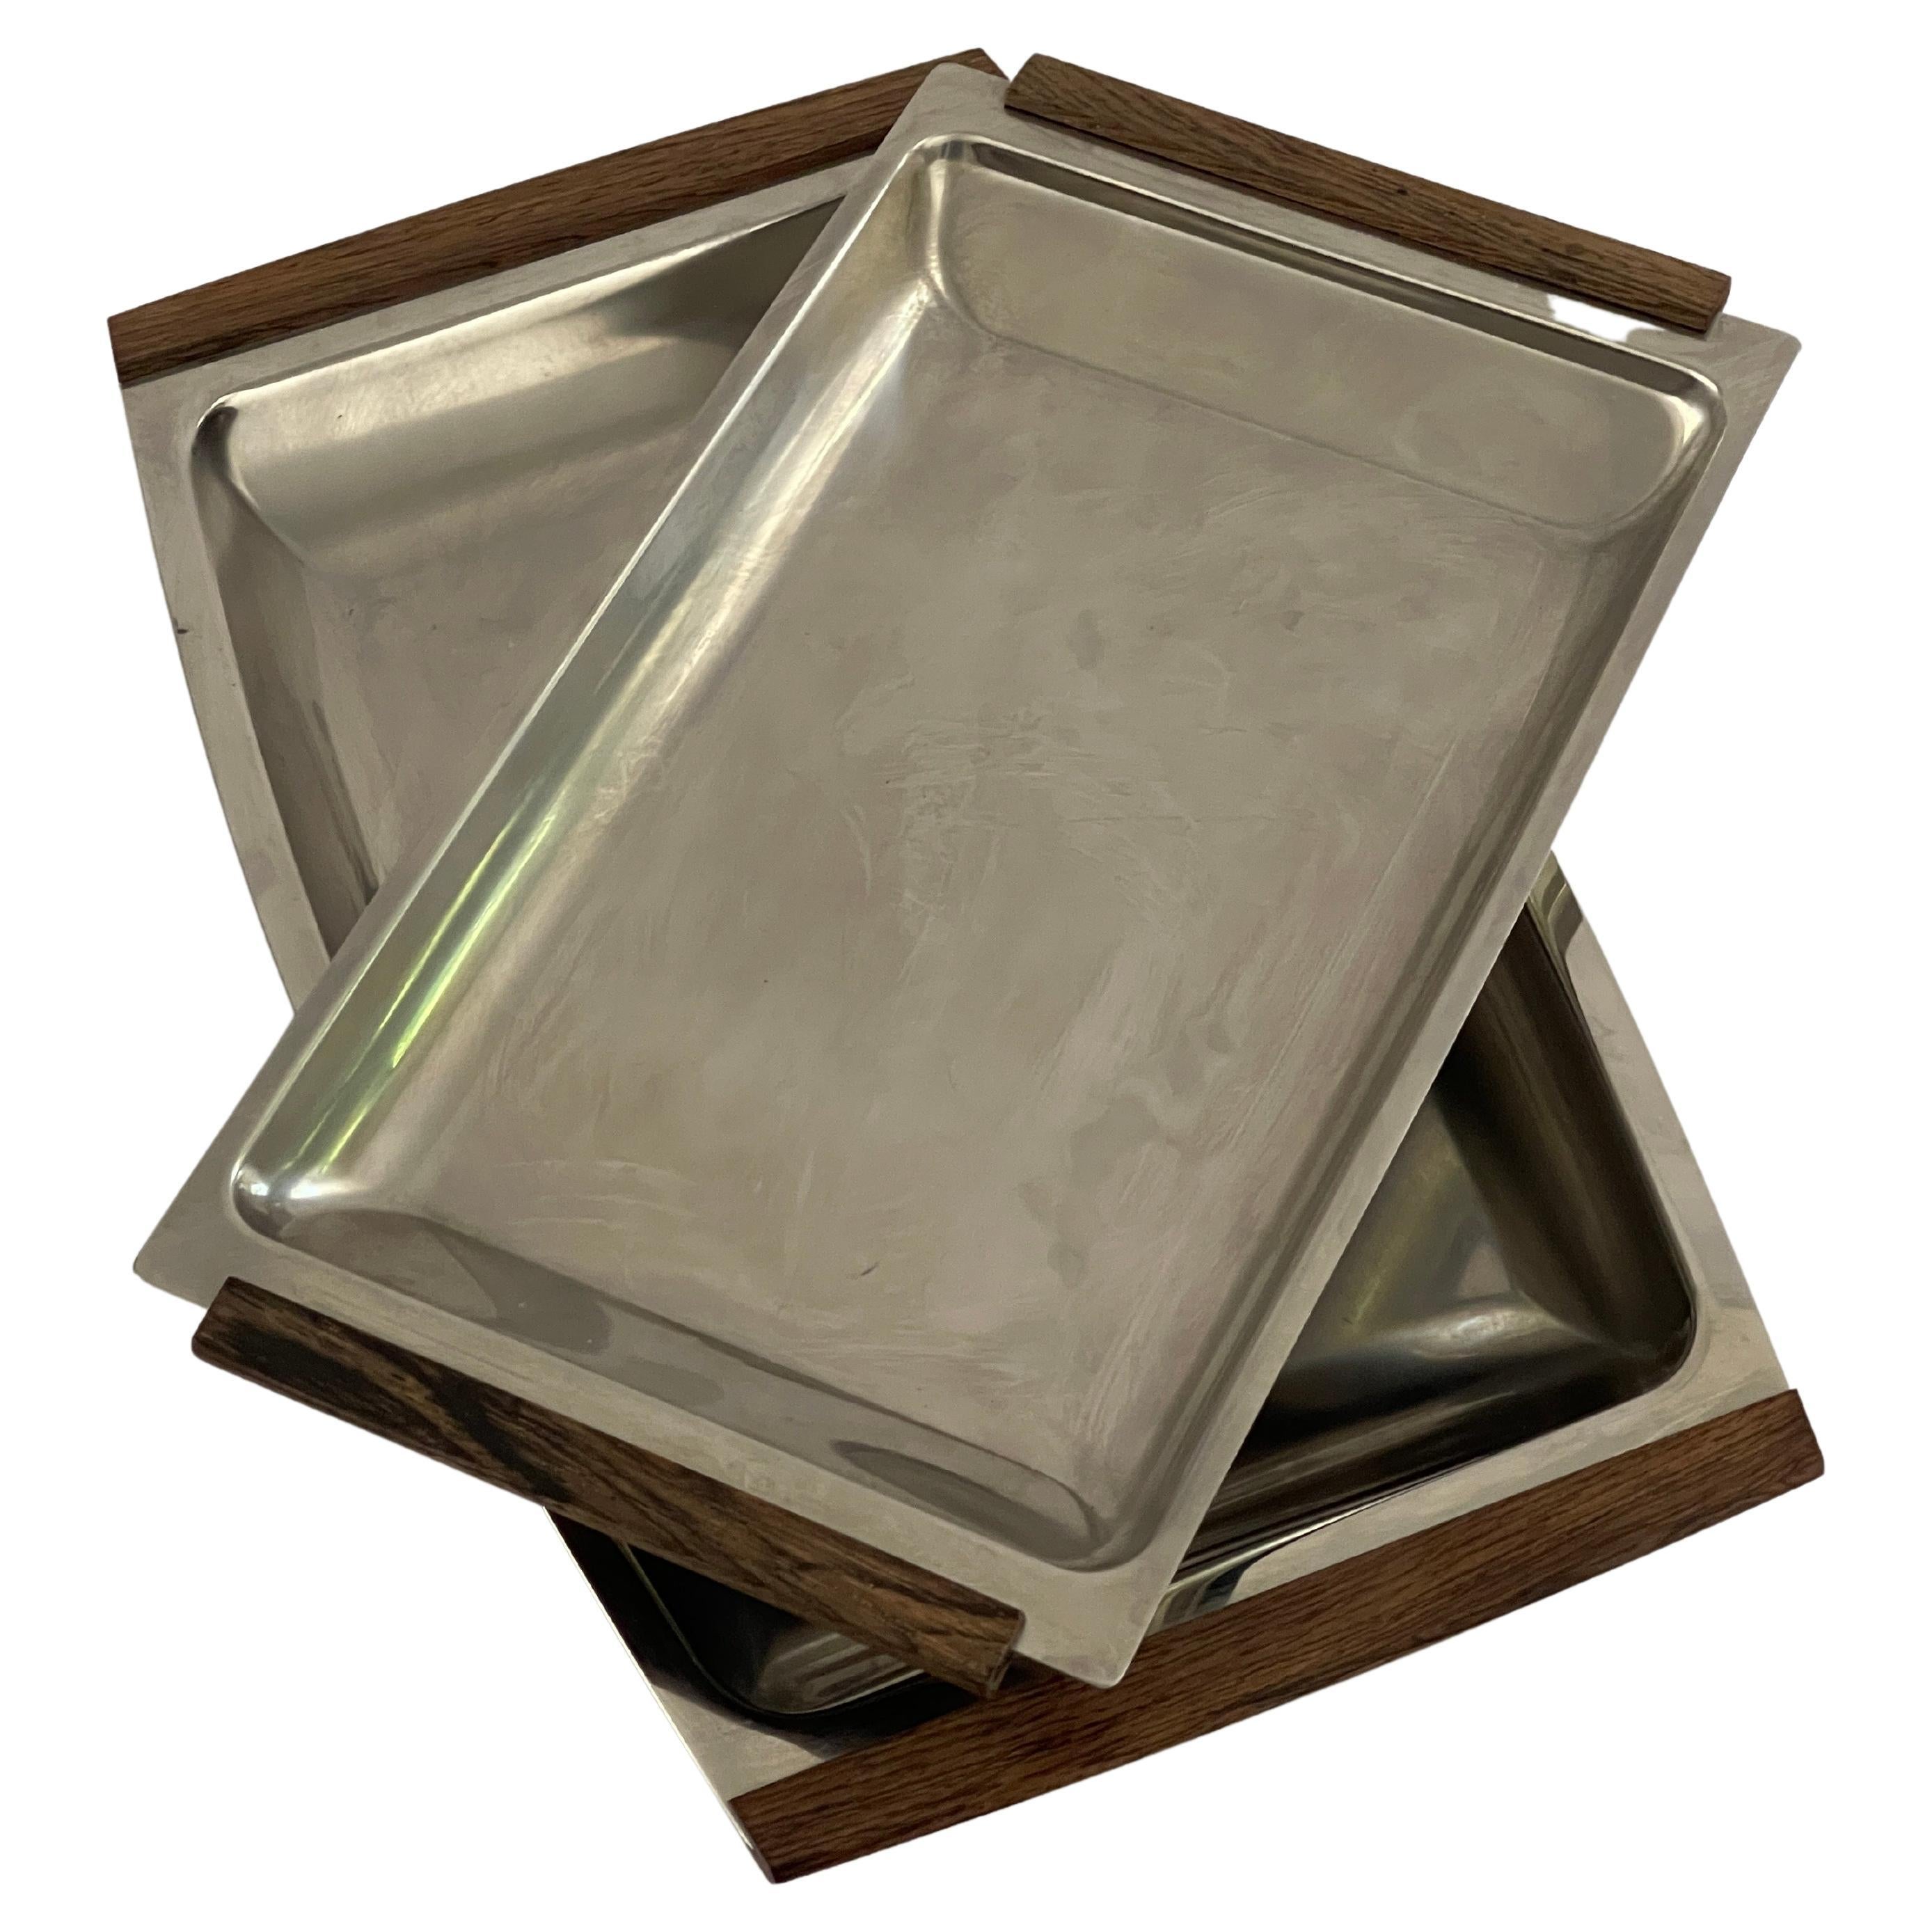 20th Century Danish Stainless Steel Serving Trays